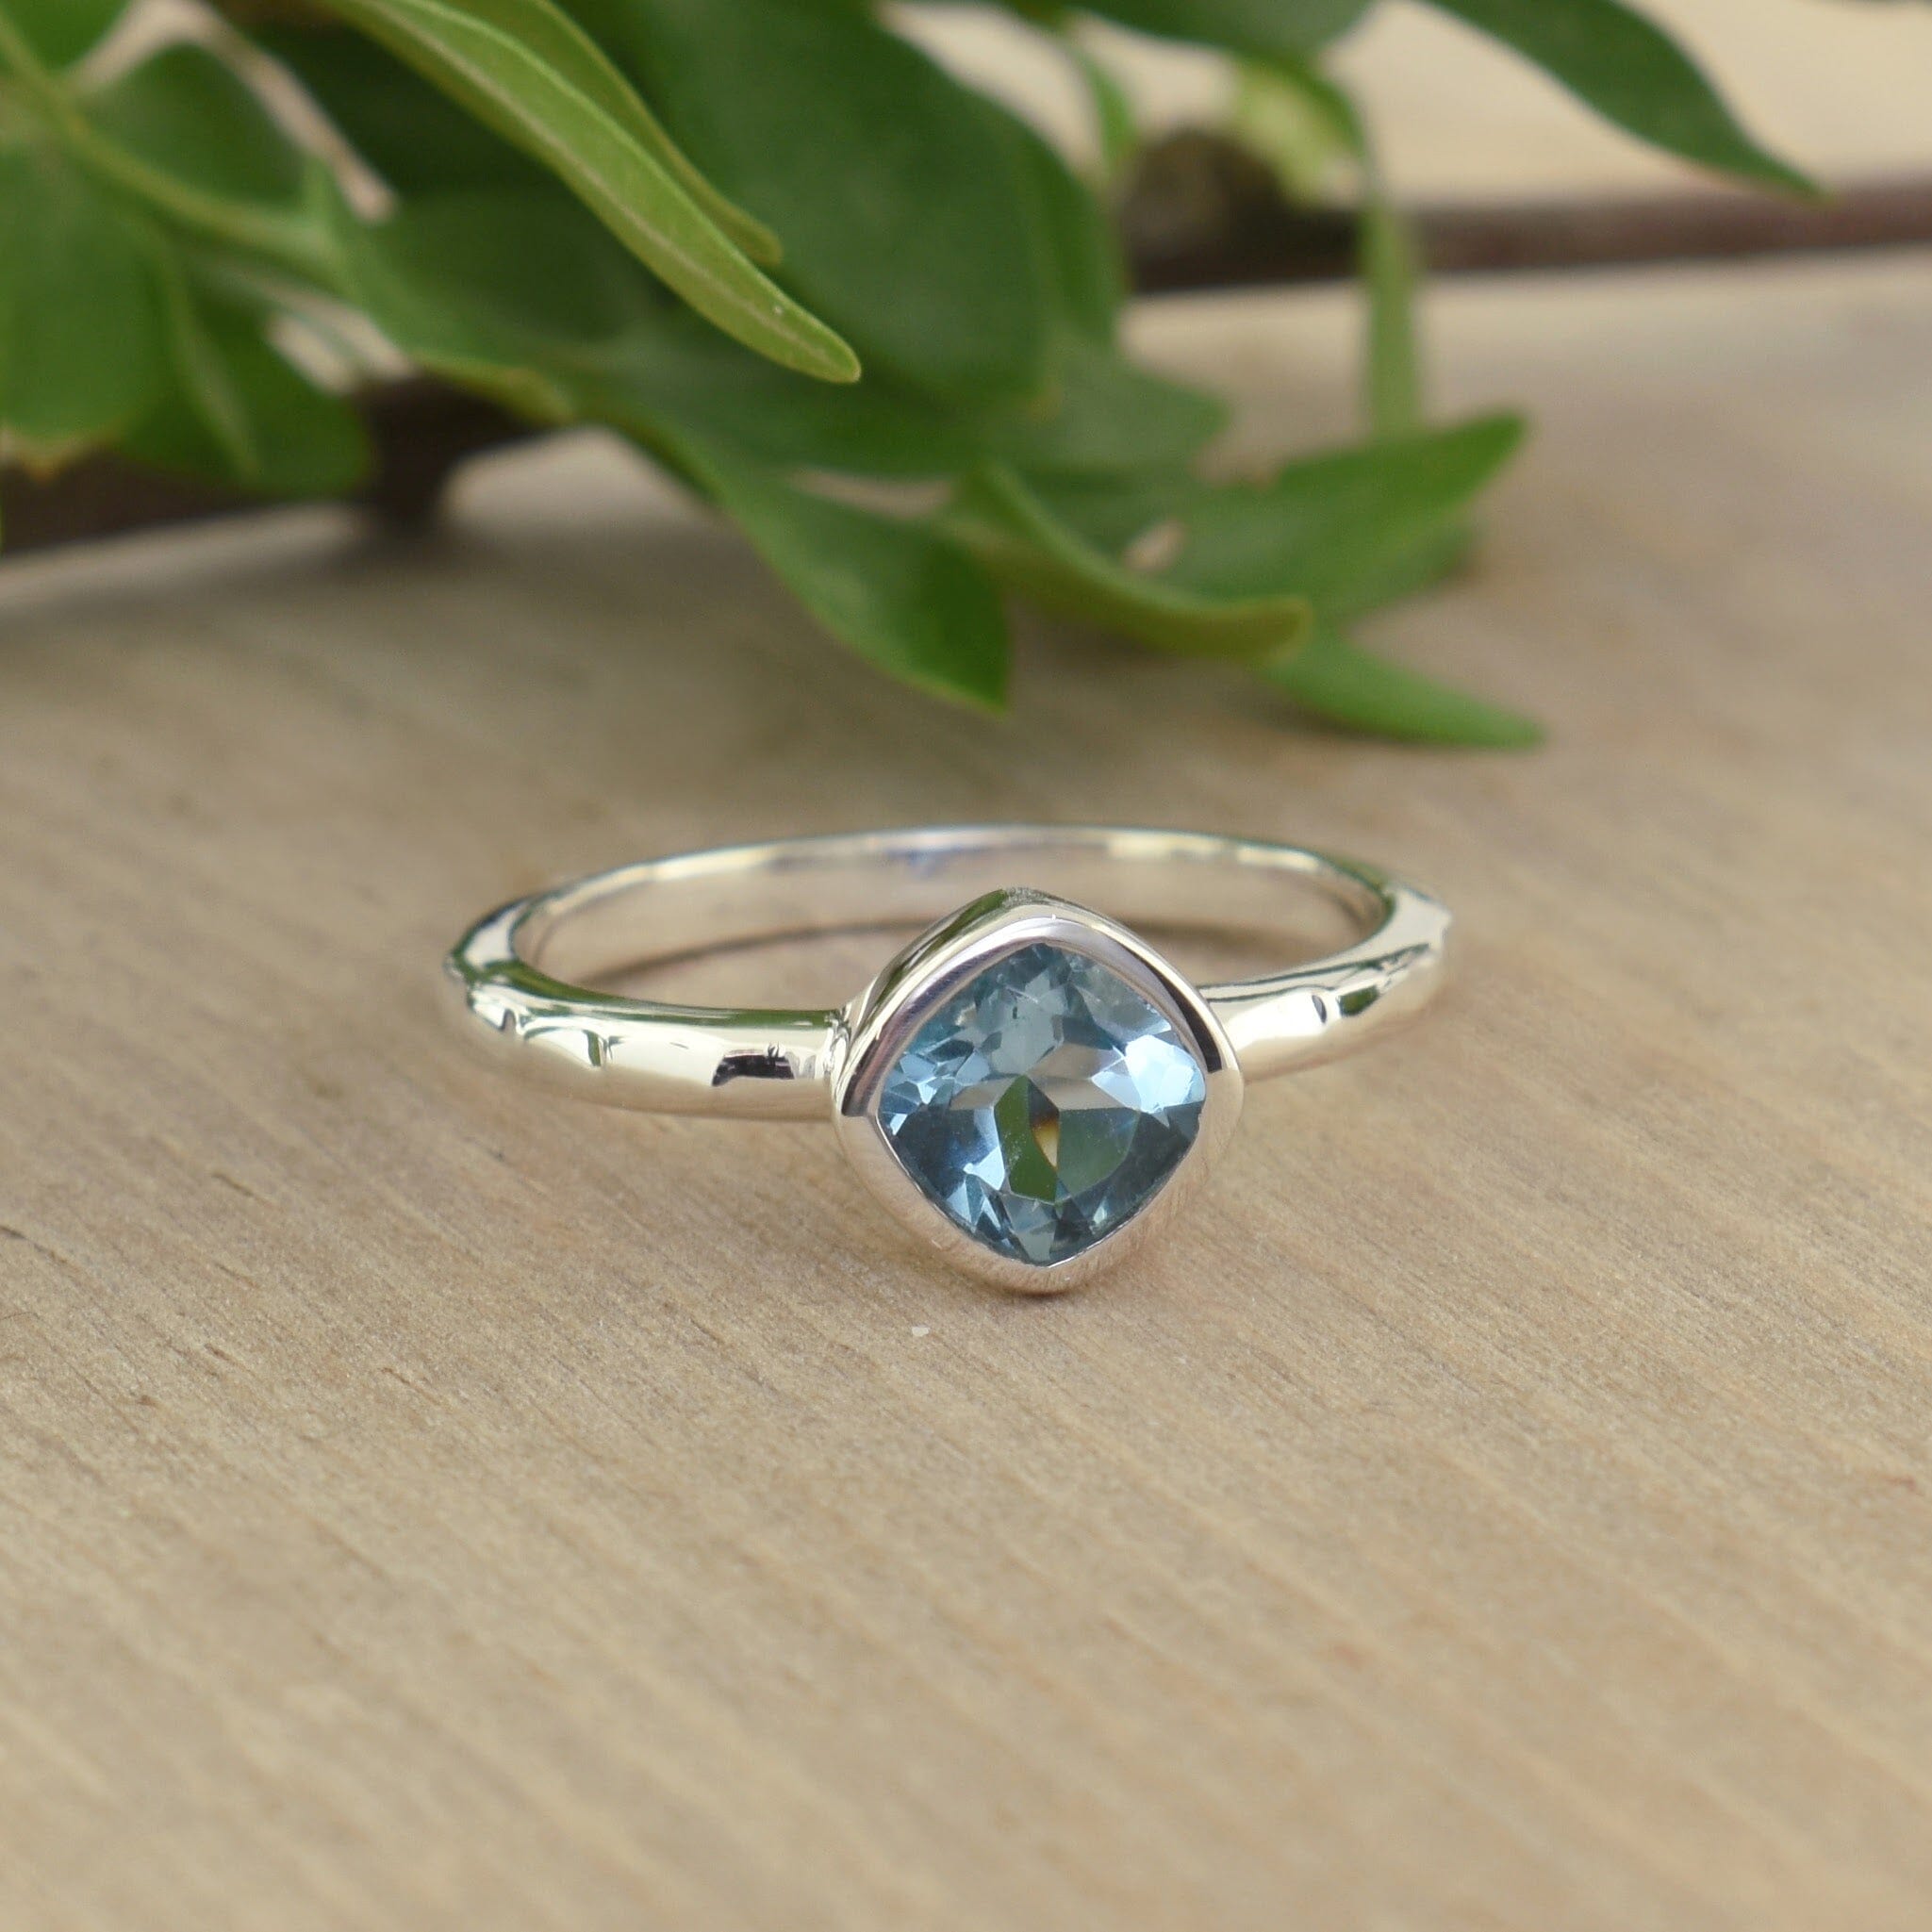 .925 sterling silver ring featuring blue crystal